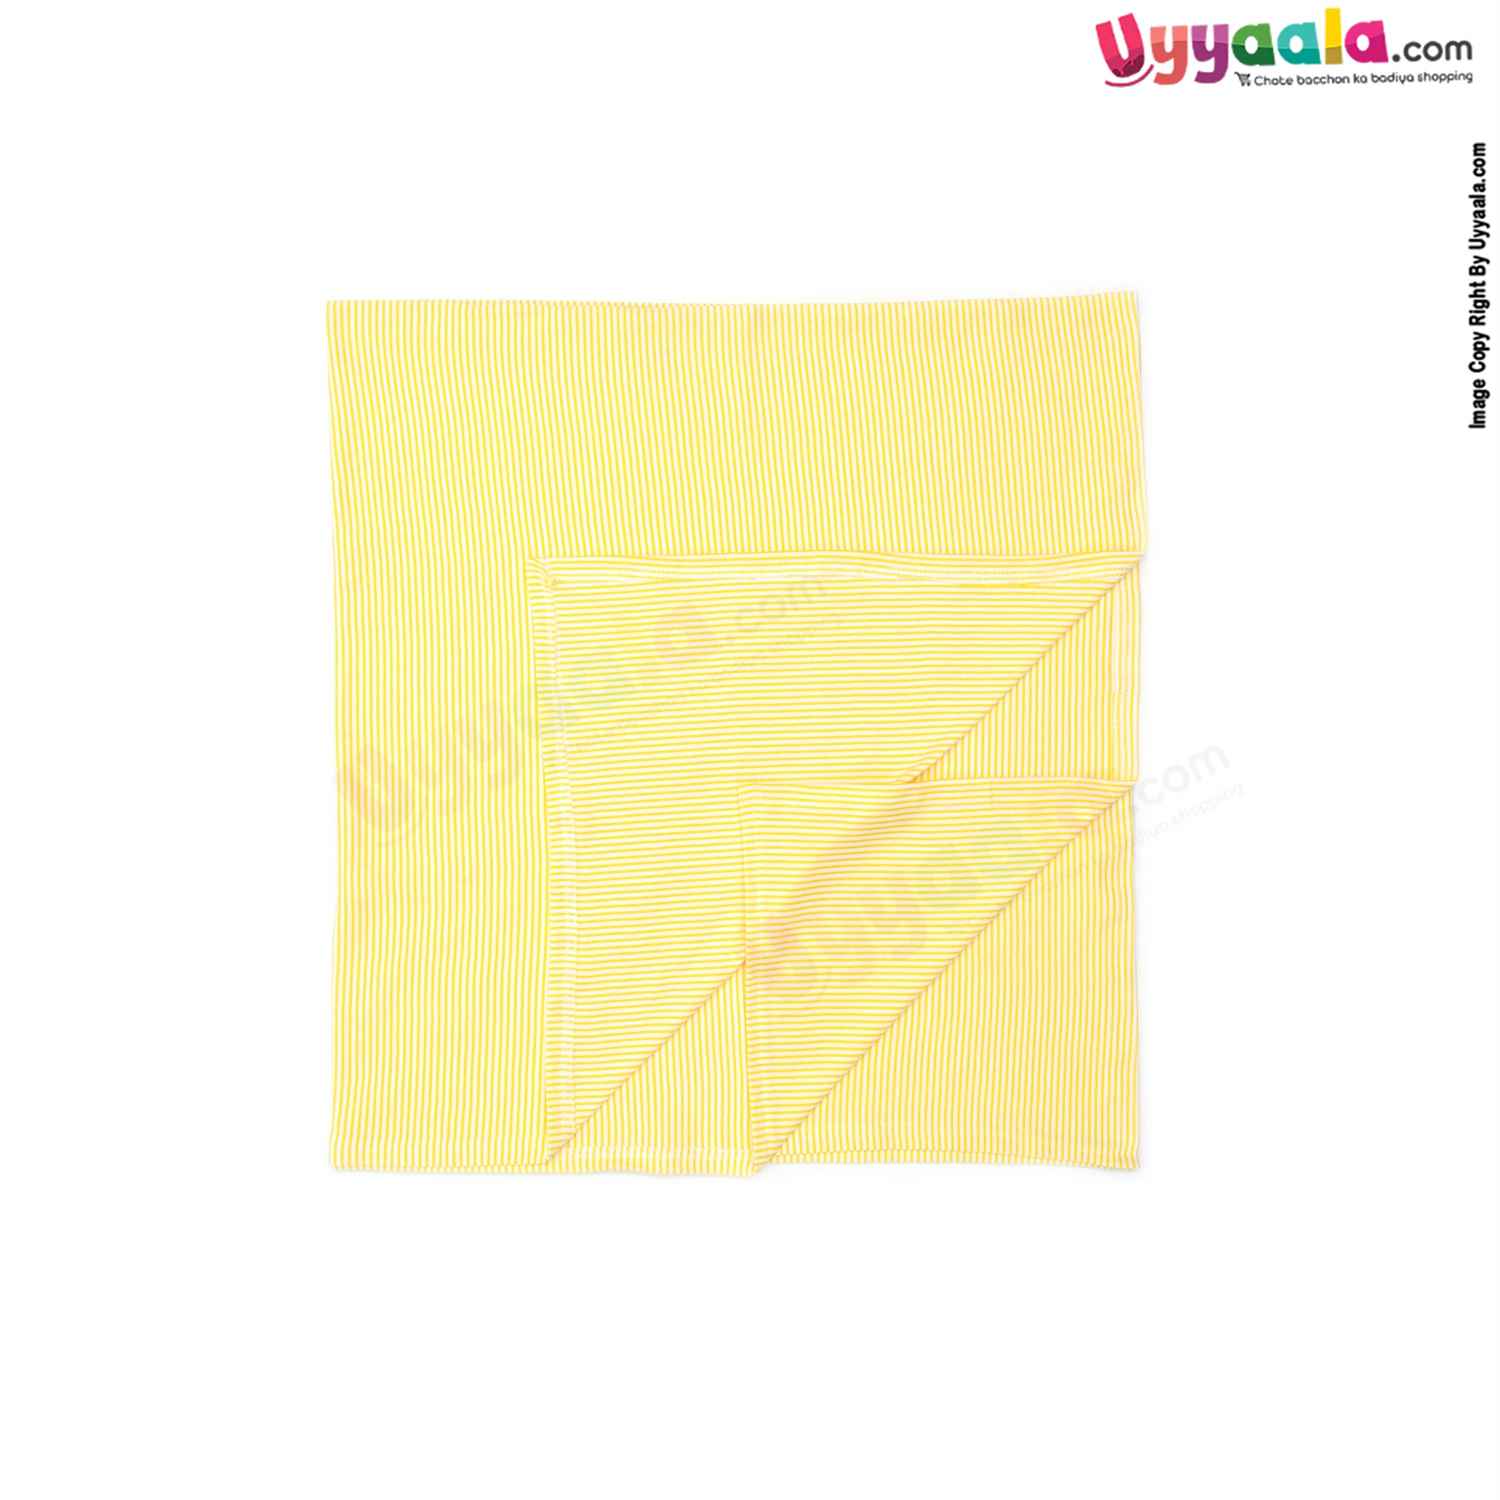 Hosiery Cotton Wrapper for Babies with Stripes Print 0-24 Age, Size (110*104cm)-Yellow